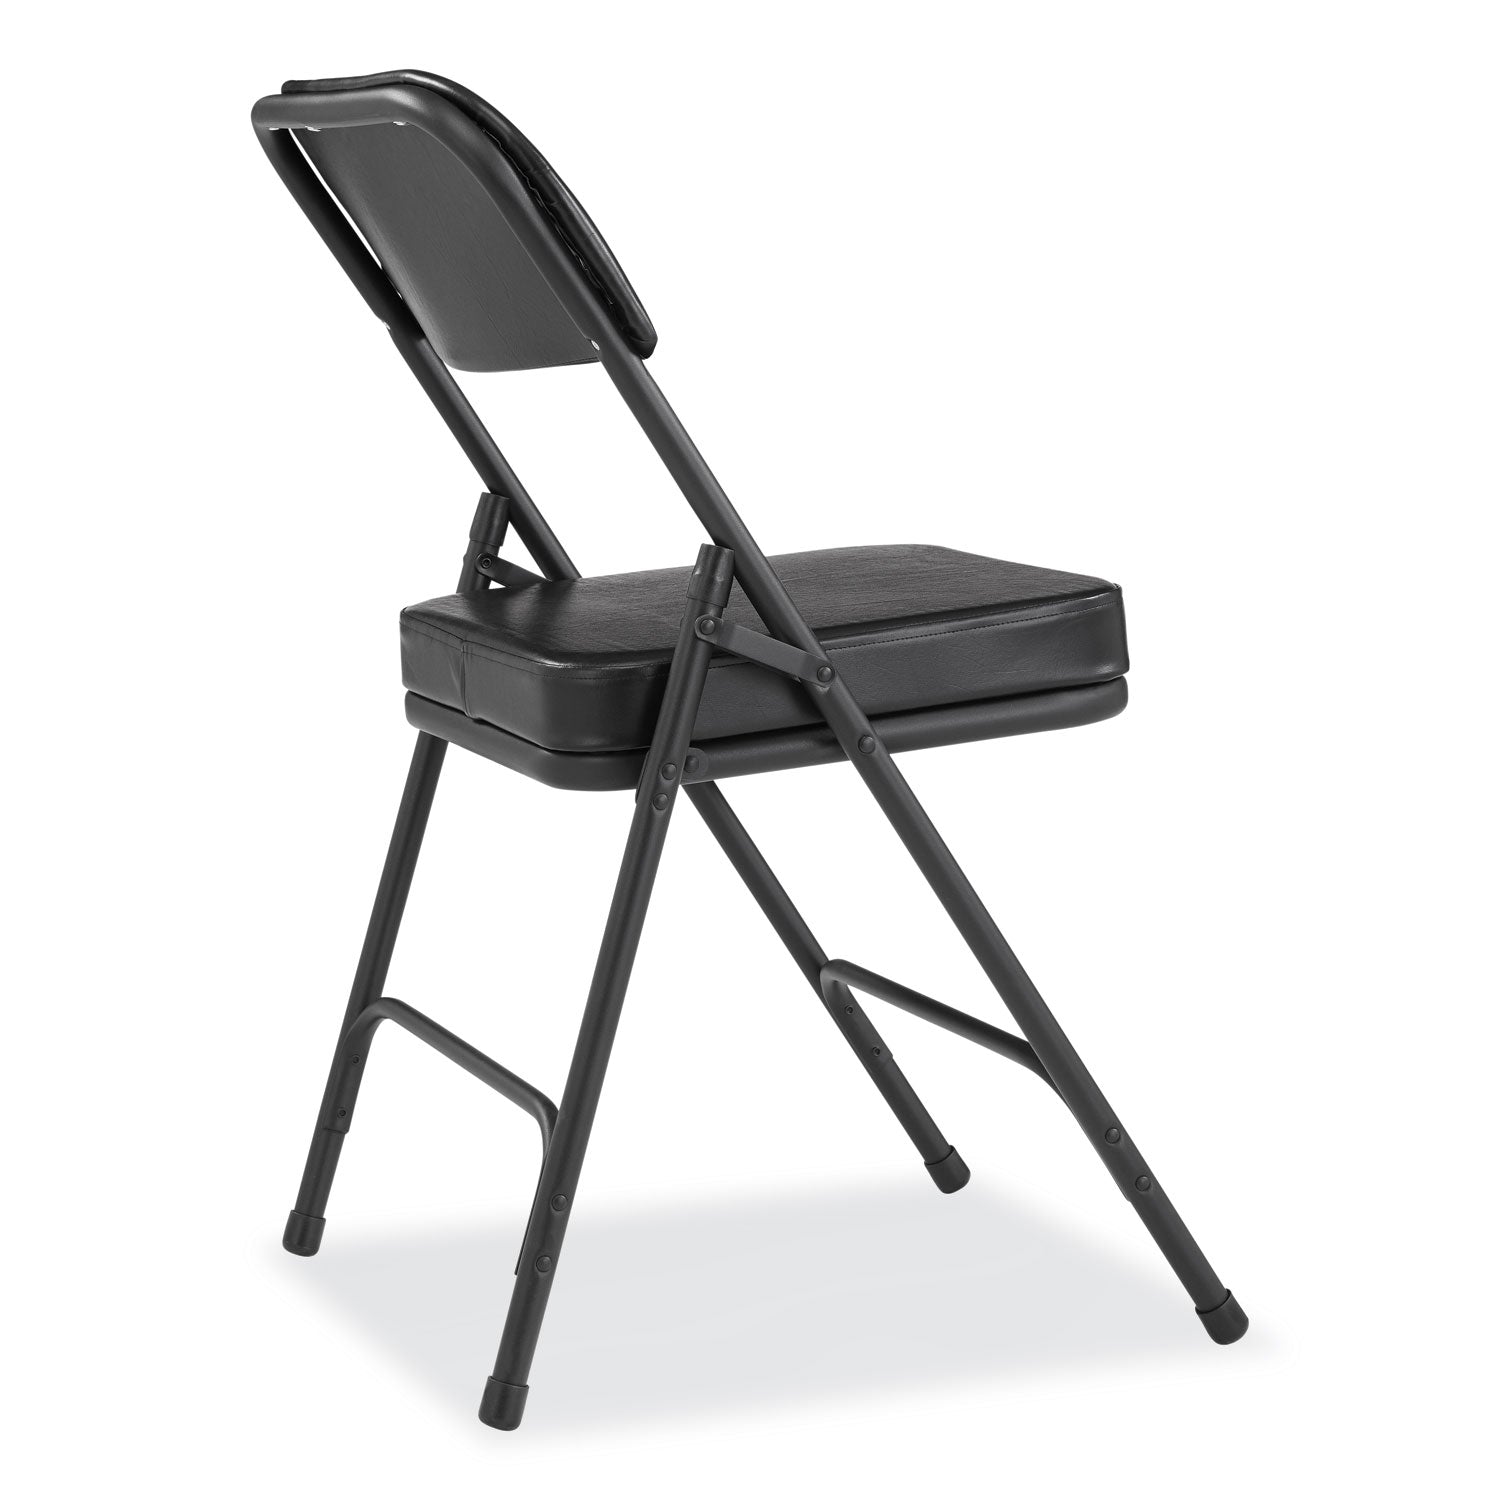 3200-series-2-vinyl-upholstered-double-hinge-folding-chair-supports-300lb-185-seat-ht-black-2-ctships-in-1-3-bus-days_nps3210 - 4